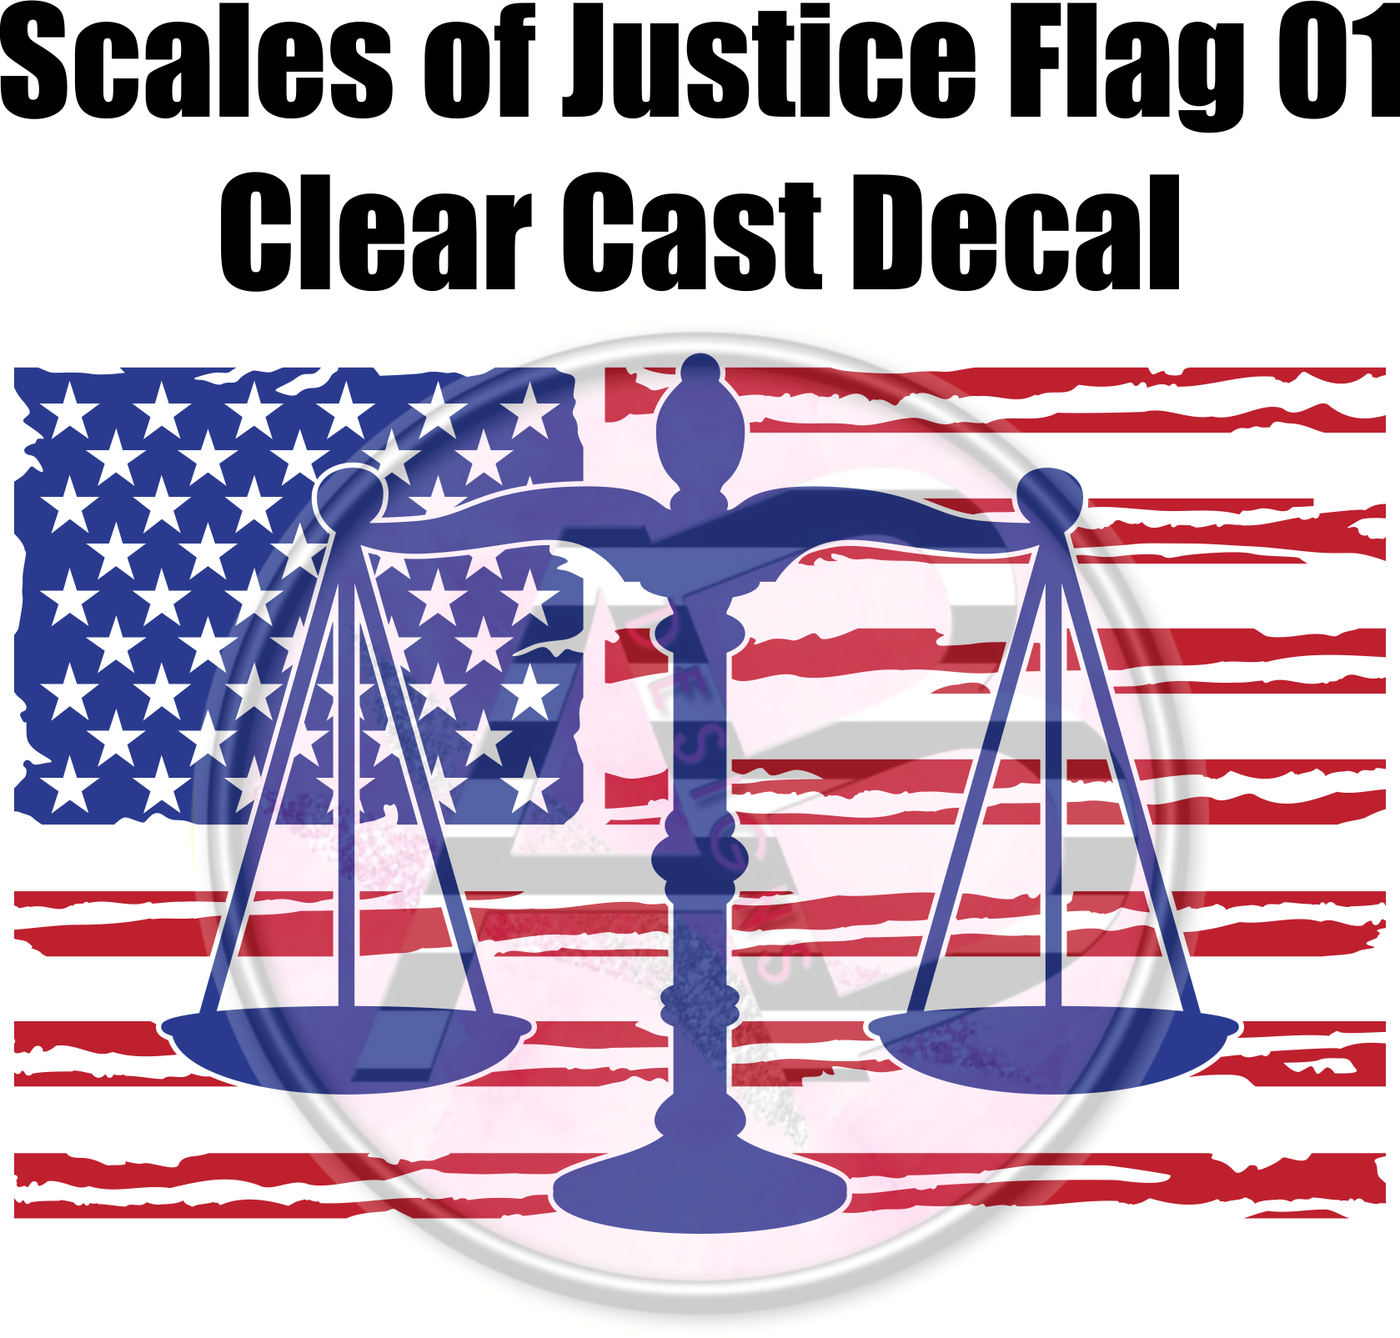 Scales of Justice Flag 01 - Clear Cast Decal - 113